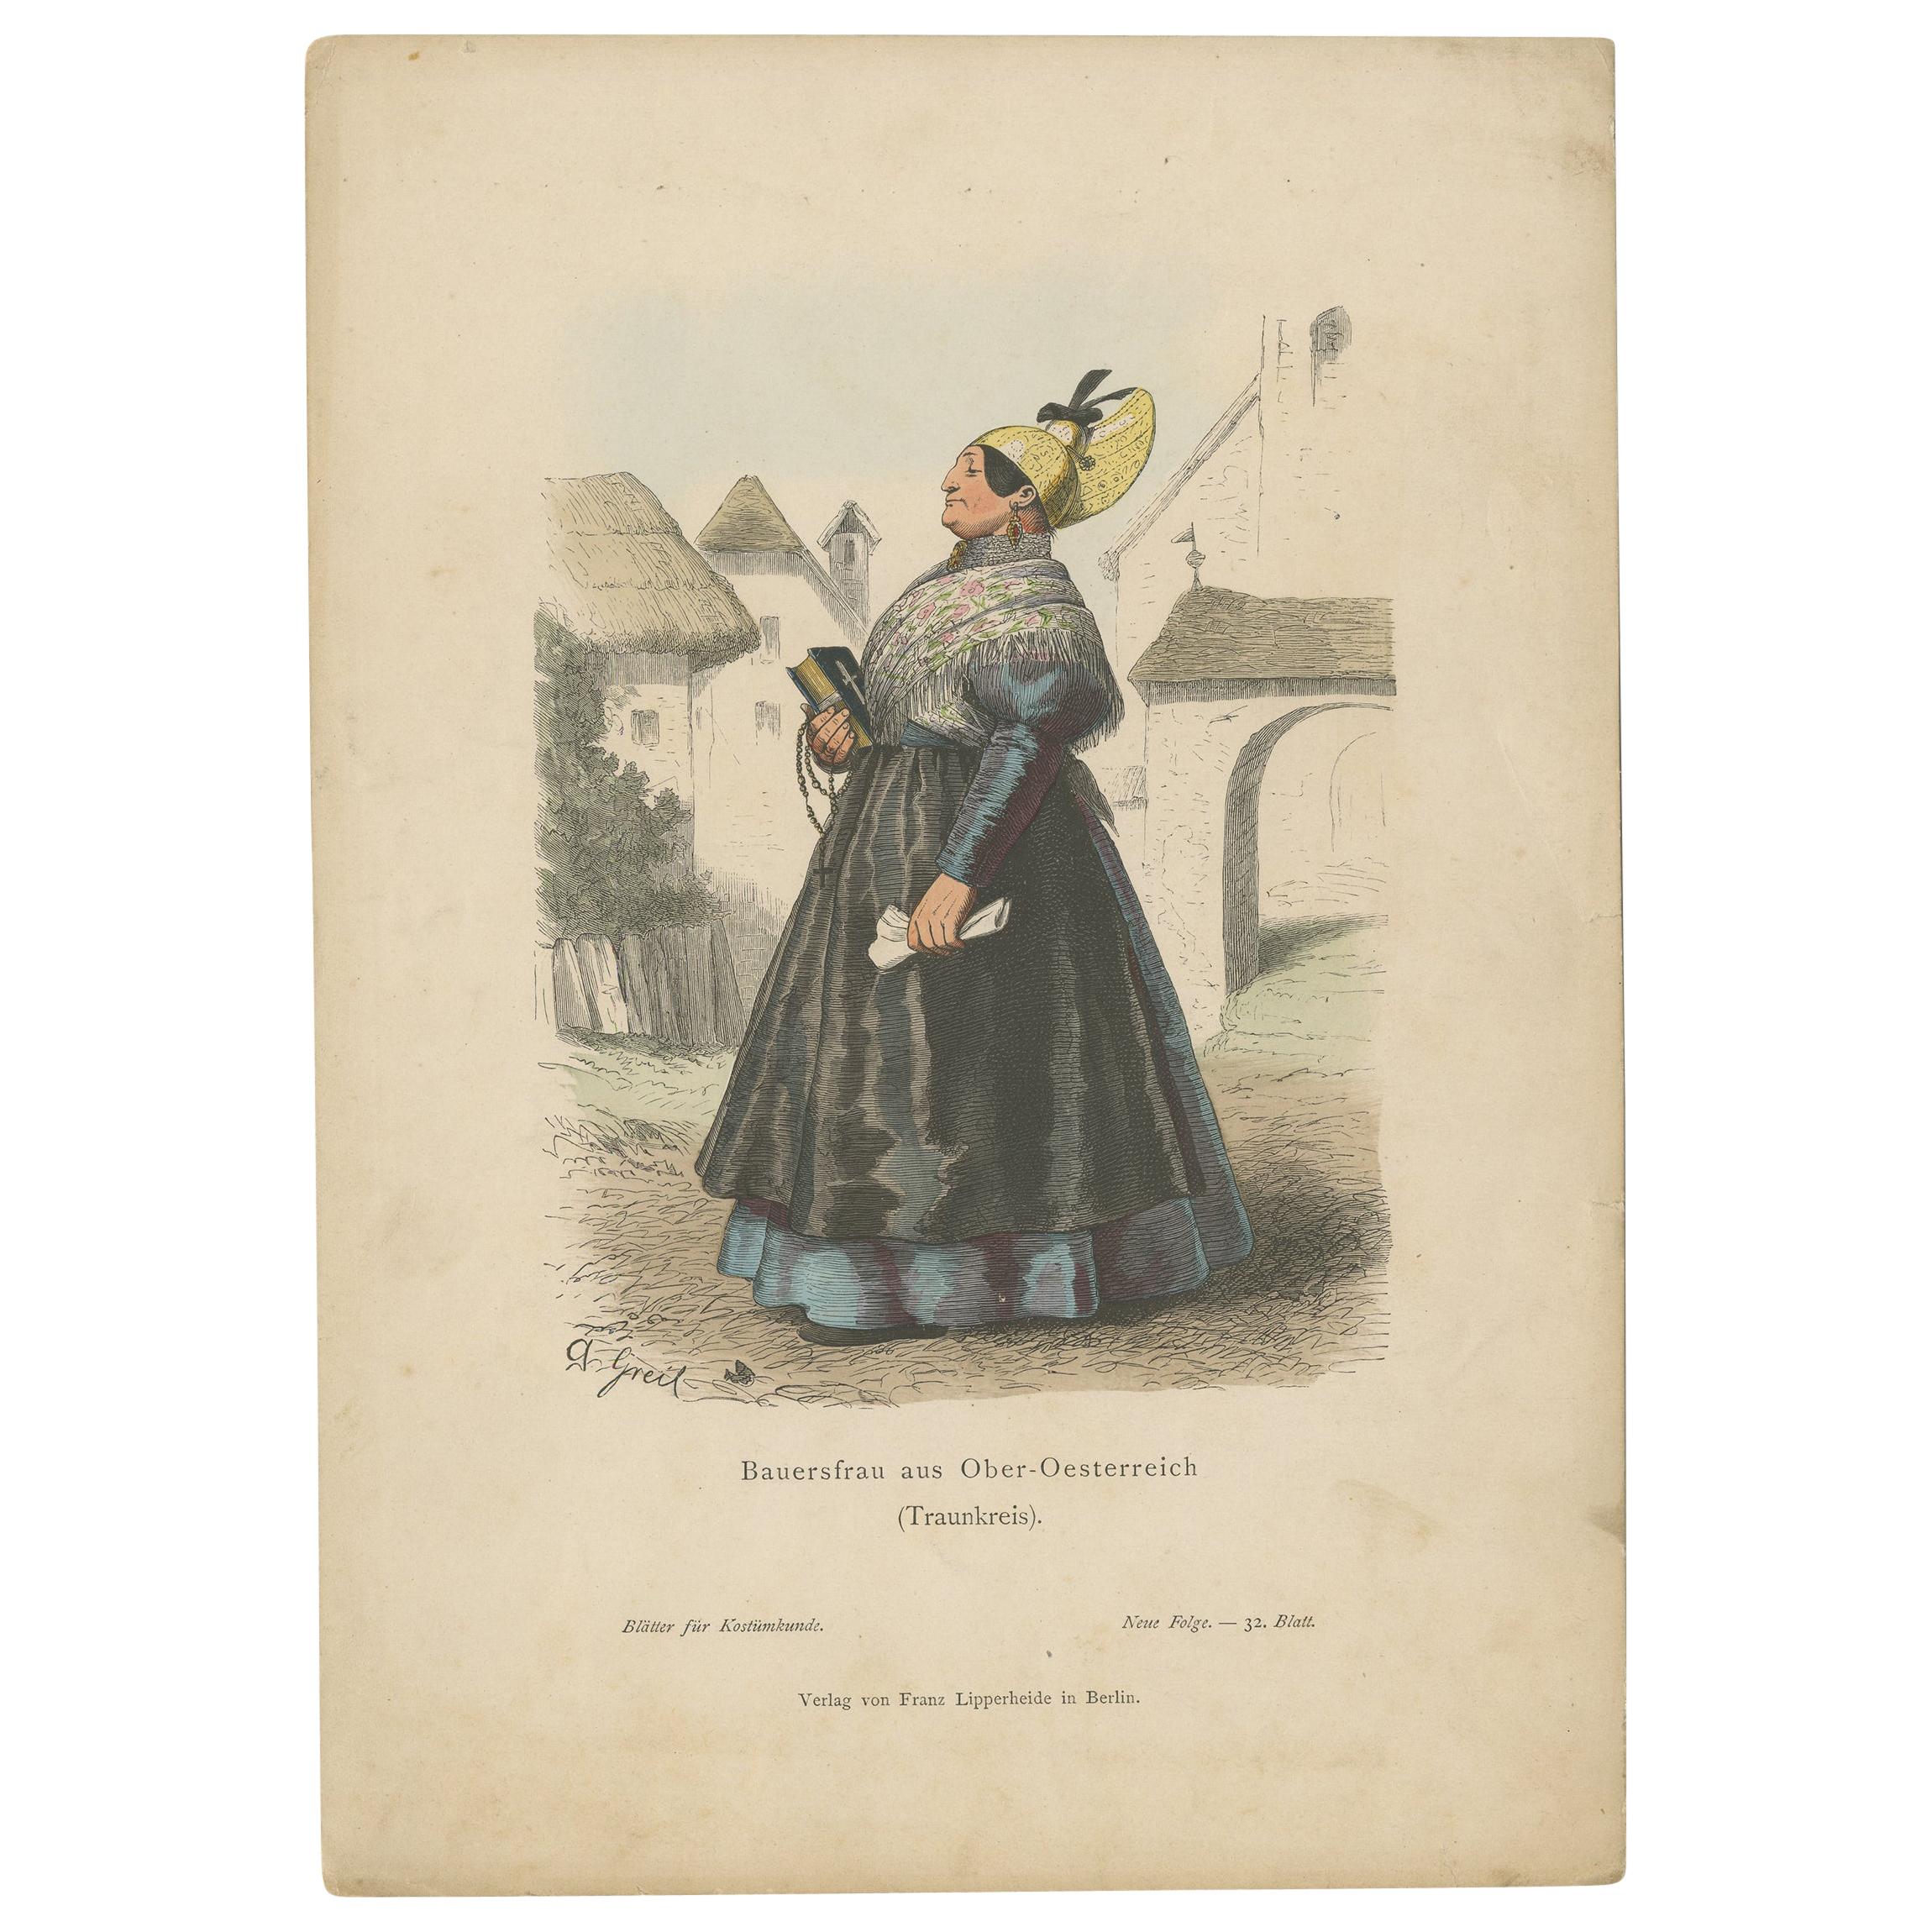 Antique Print of a Farmer's Wife from the Region of Traunkreis, Austria